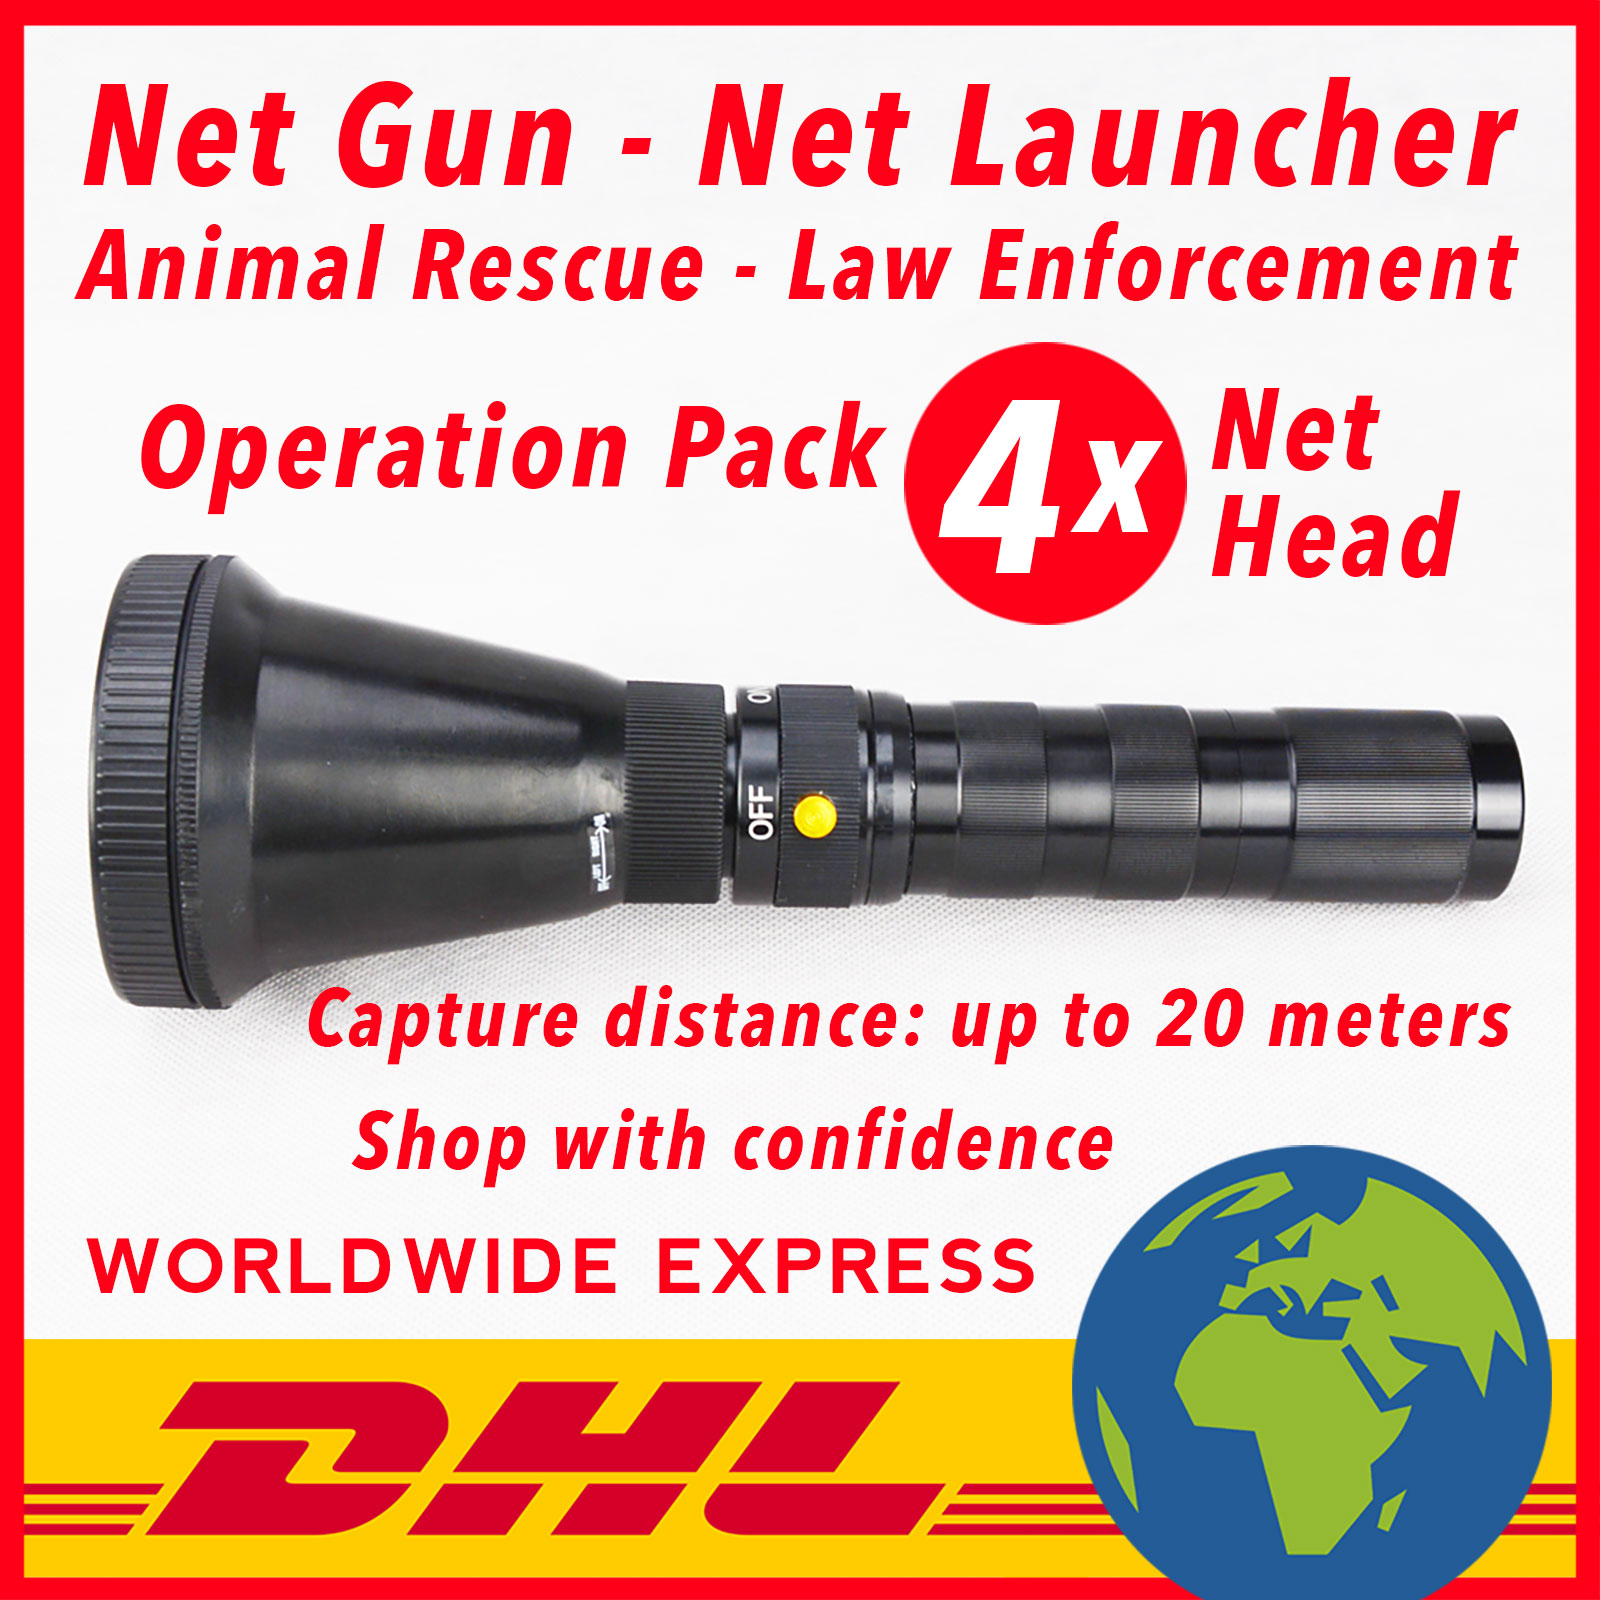 Net Guns USA - Fr$469 Free DHL Delivery - Net,CO2&Case Included - Net Guns  for Sale - Net Shooter - Animal Capture